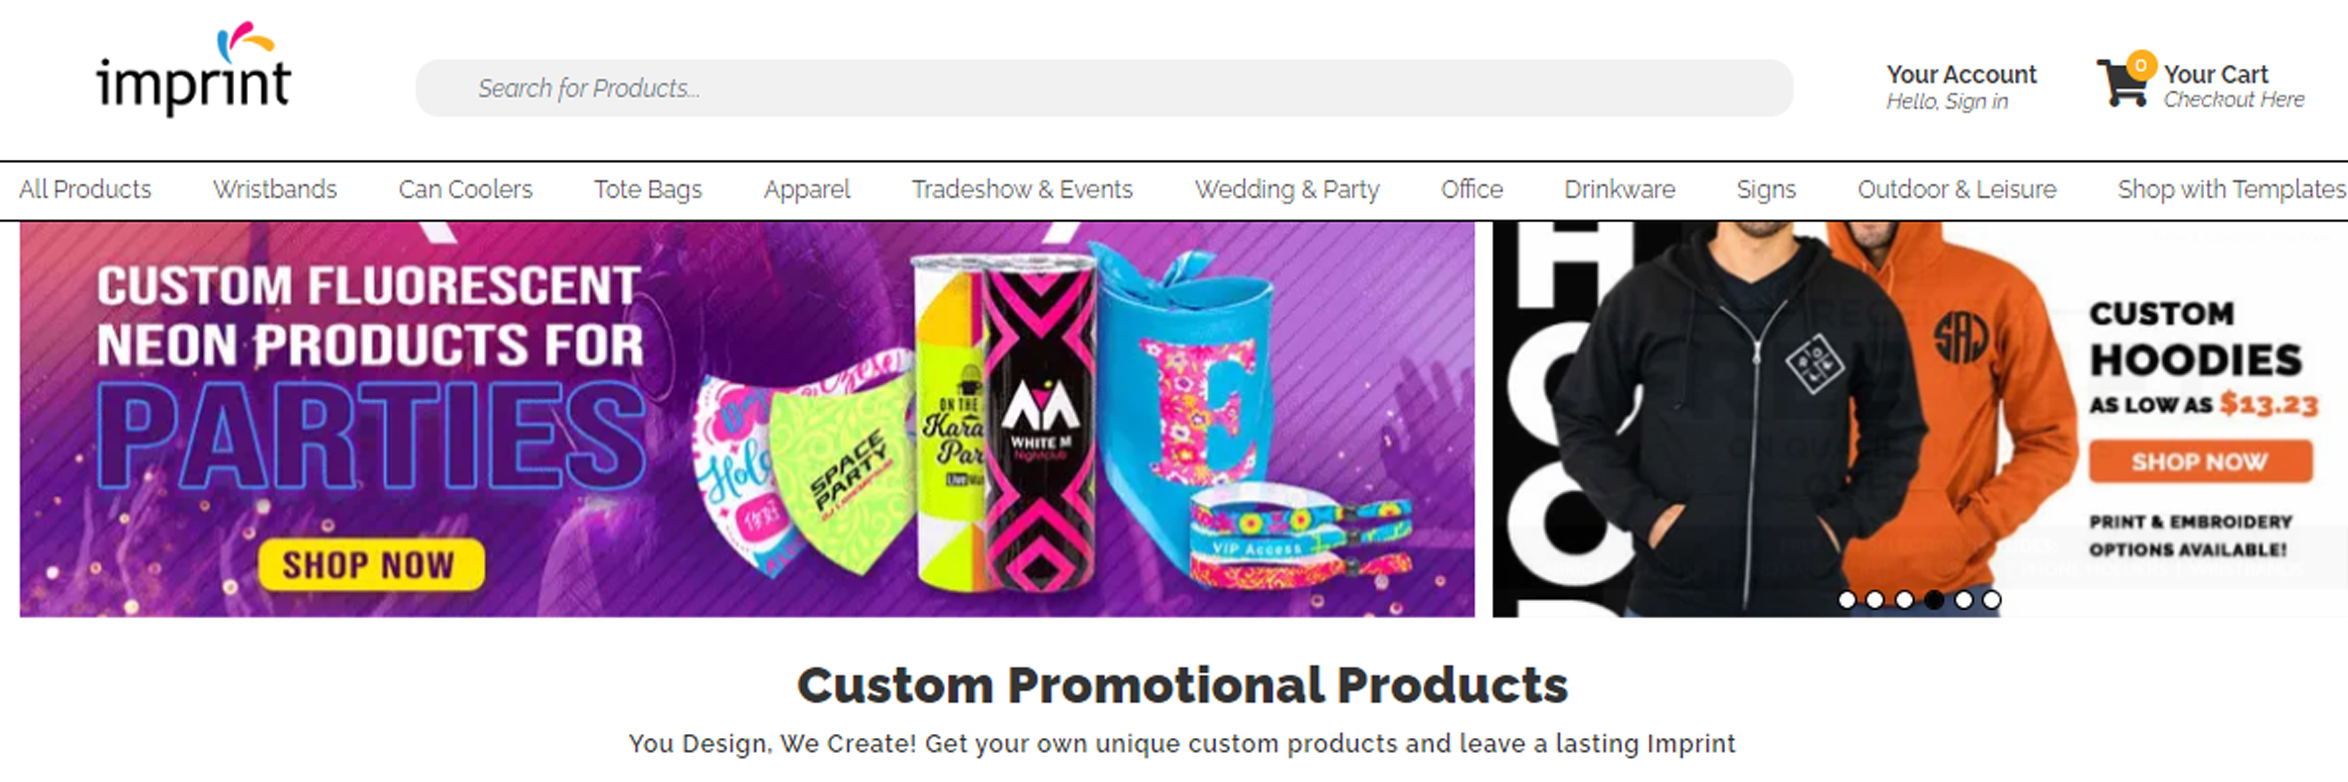 imprint promotional product banner